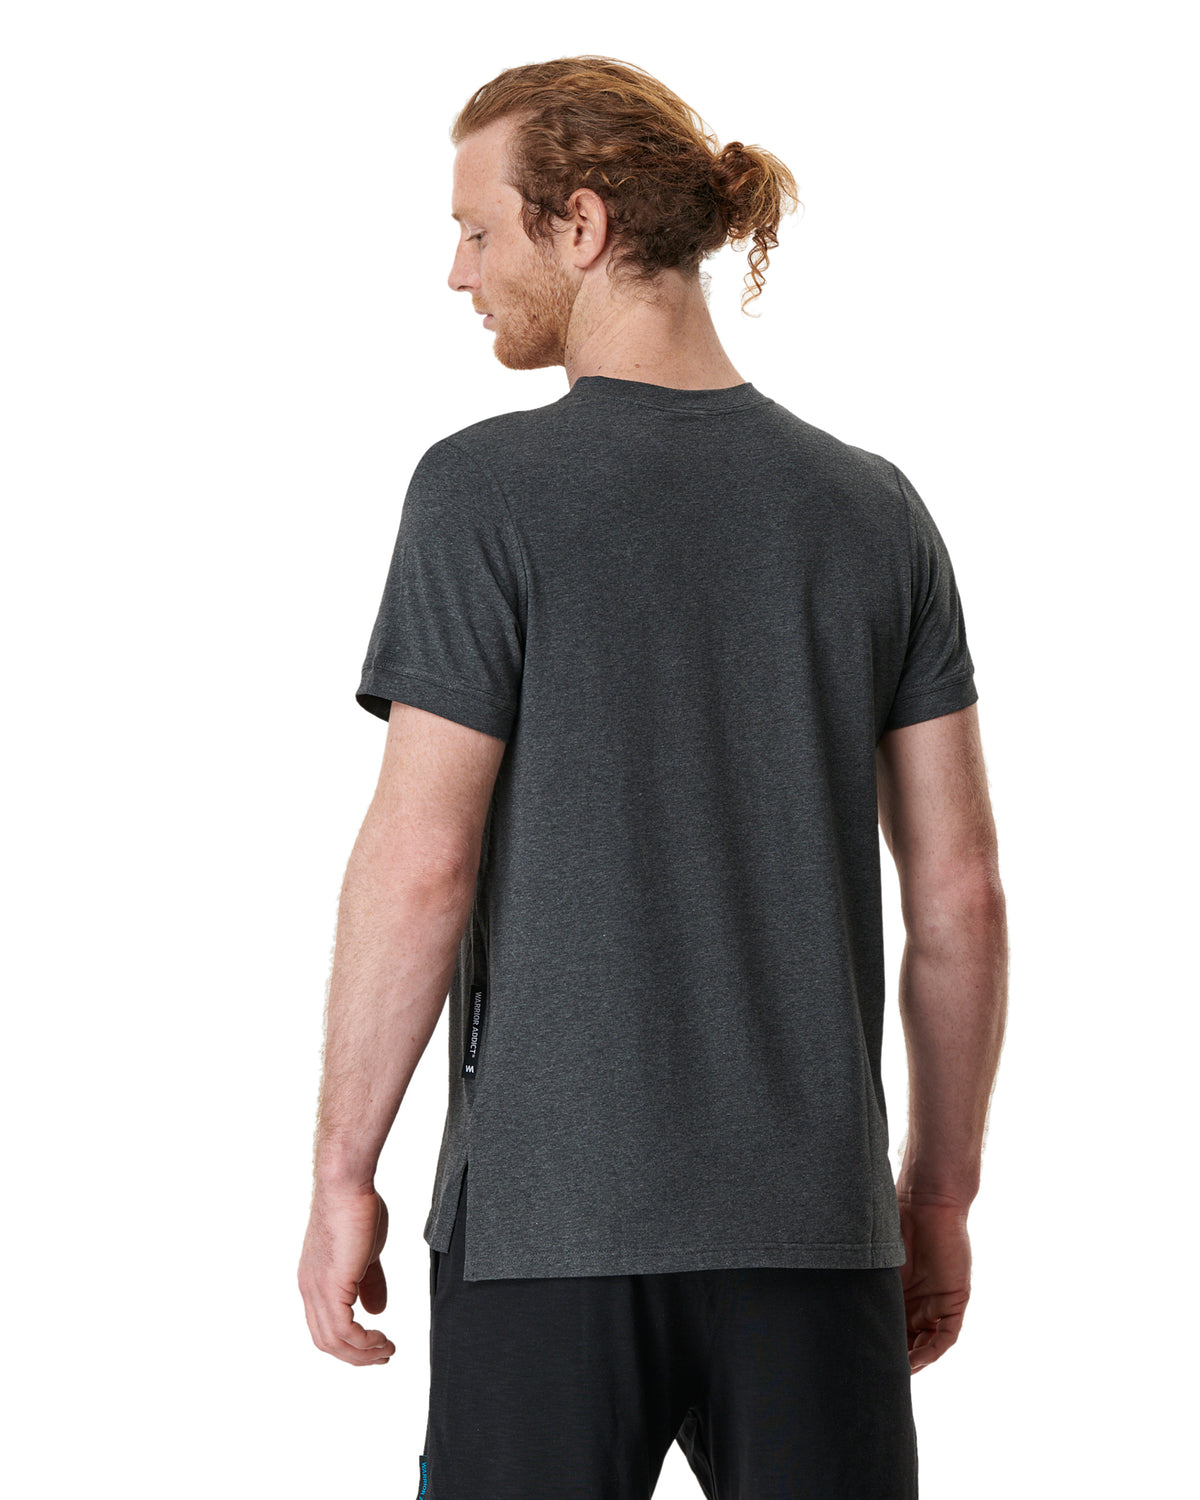 back view of man wearing grey mens yoga t-shirt by warrior addict 